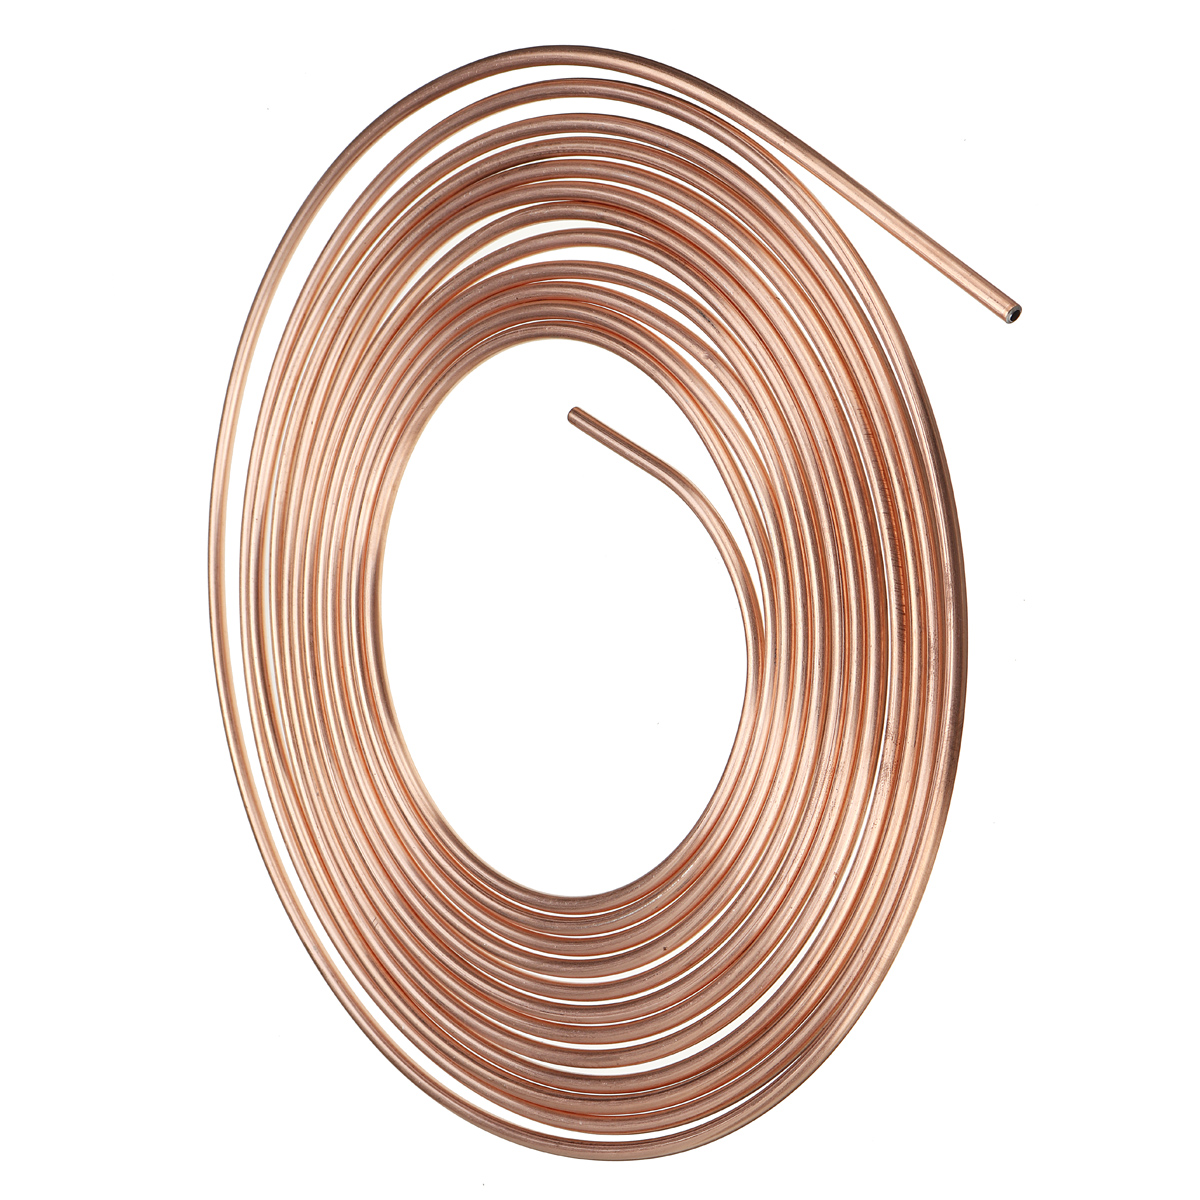 Universal-25Ft-Copper-Nickel-Brake-Line-Tubing-Kit-316quot-OD-with-15Pcs-Nuts-1586631-8